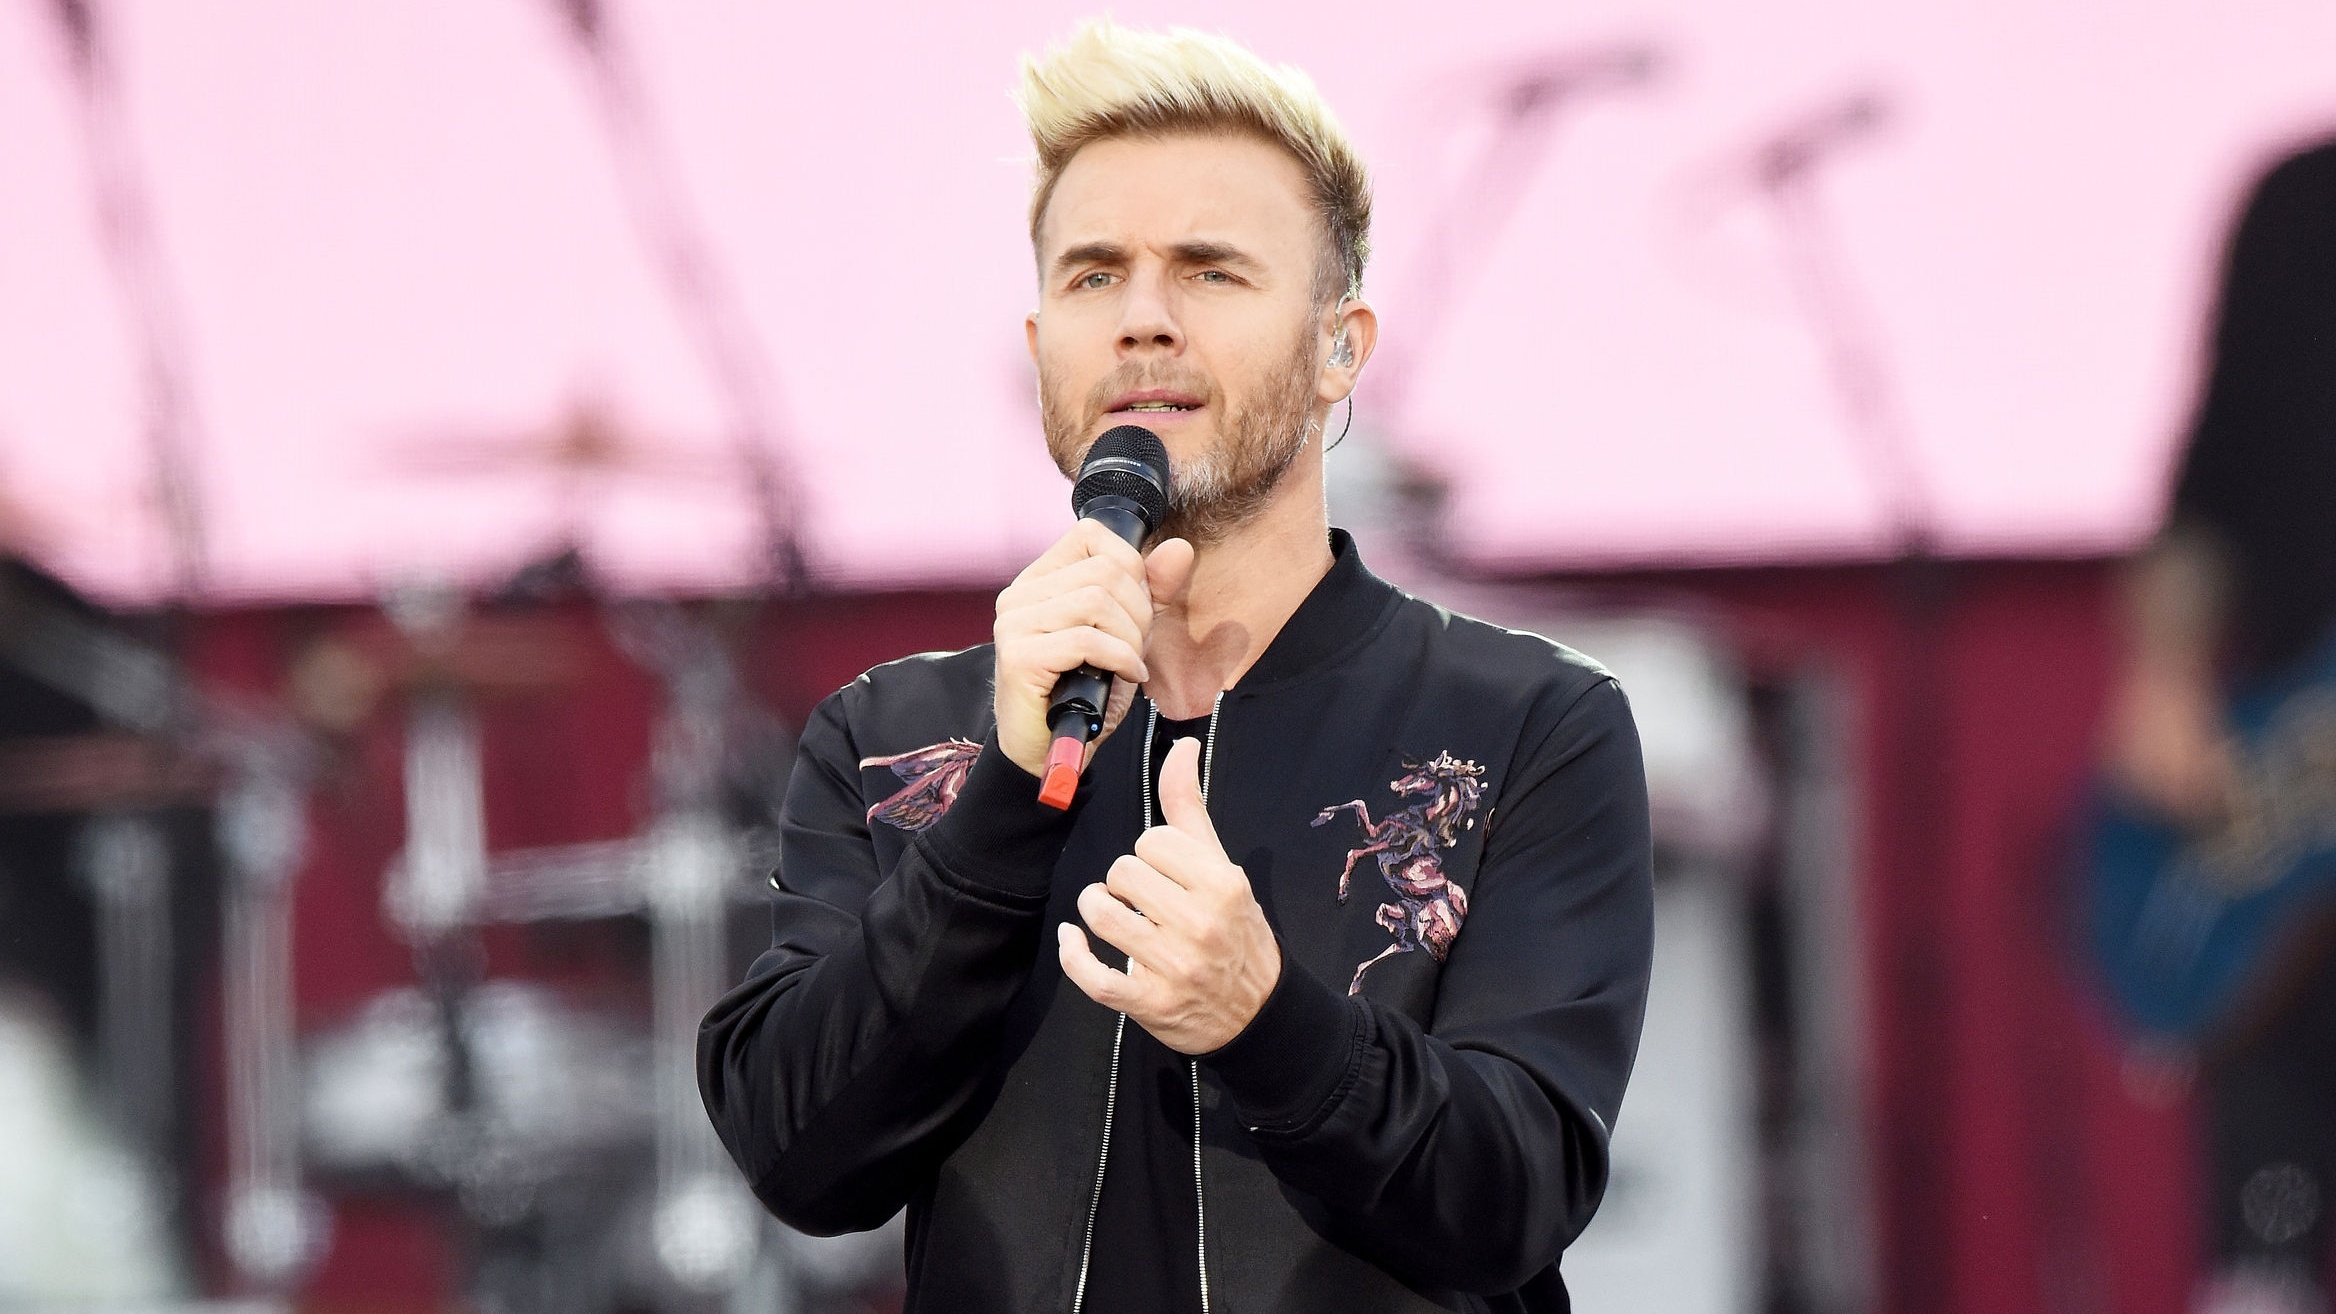 Gary Barlow posts tribute to George Michael on his birthday